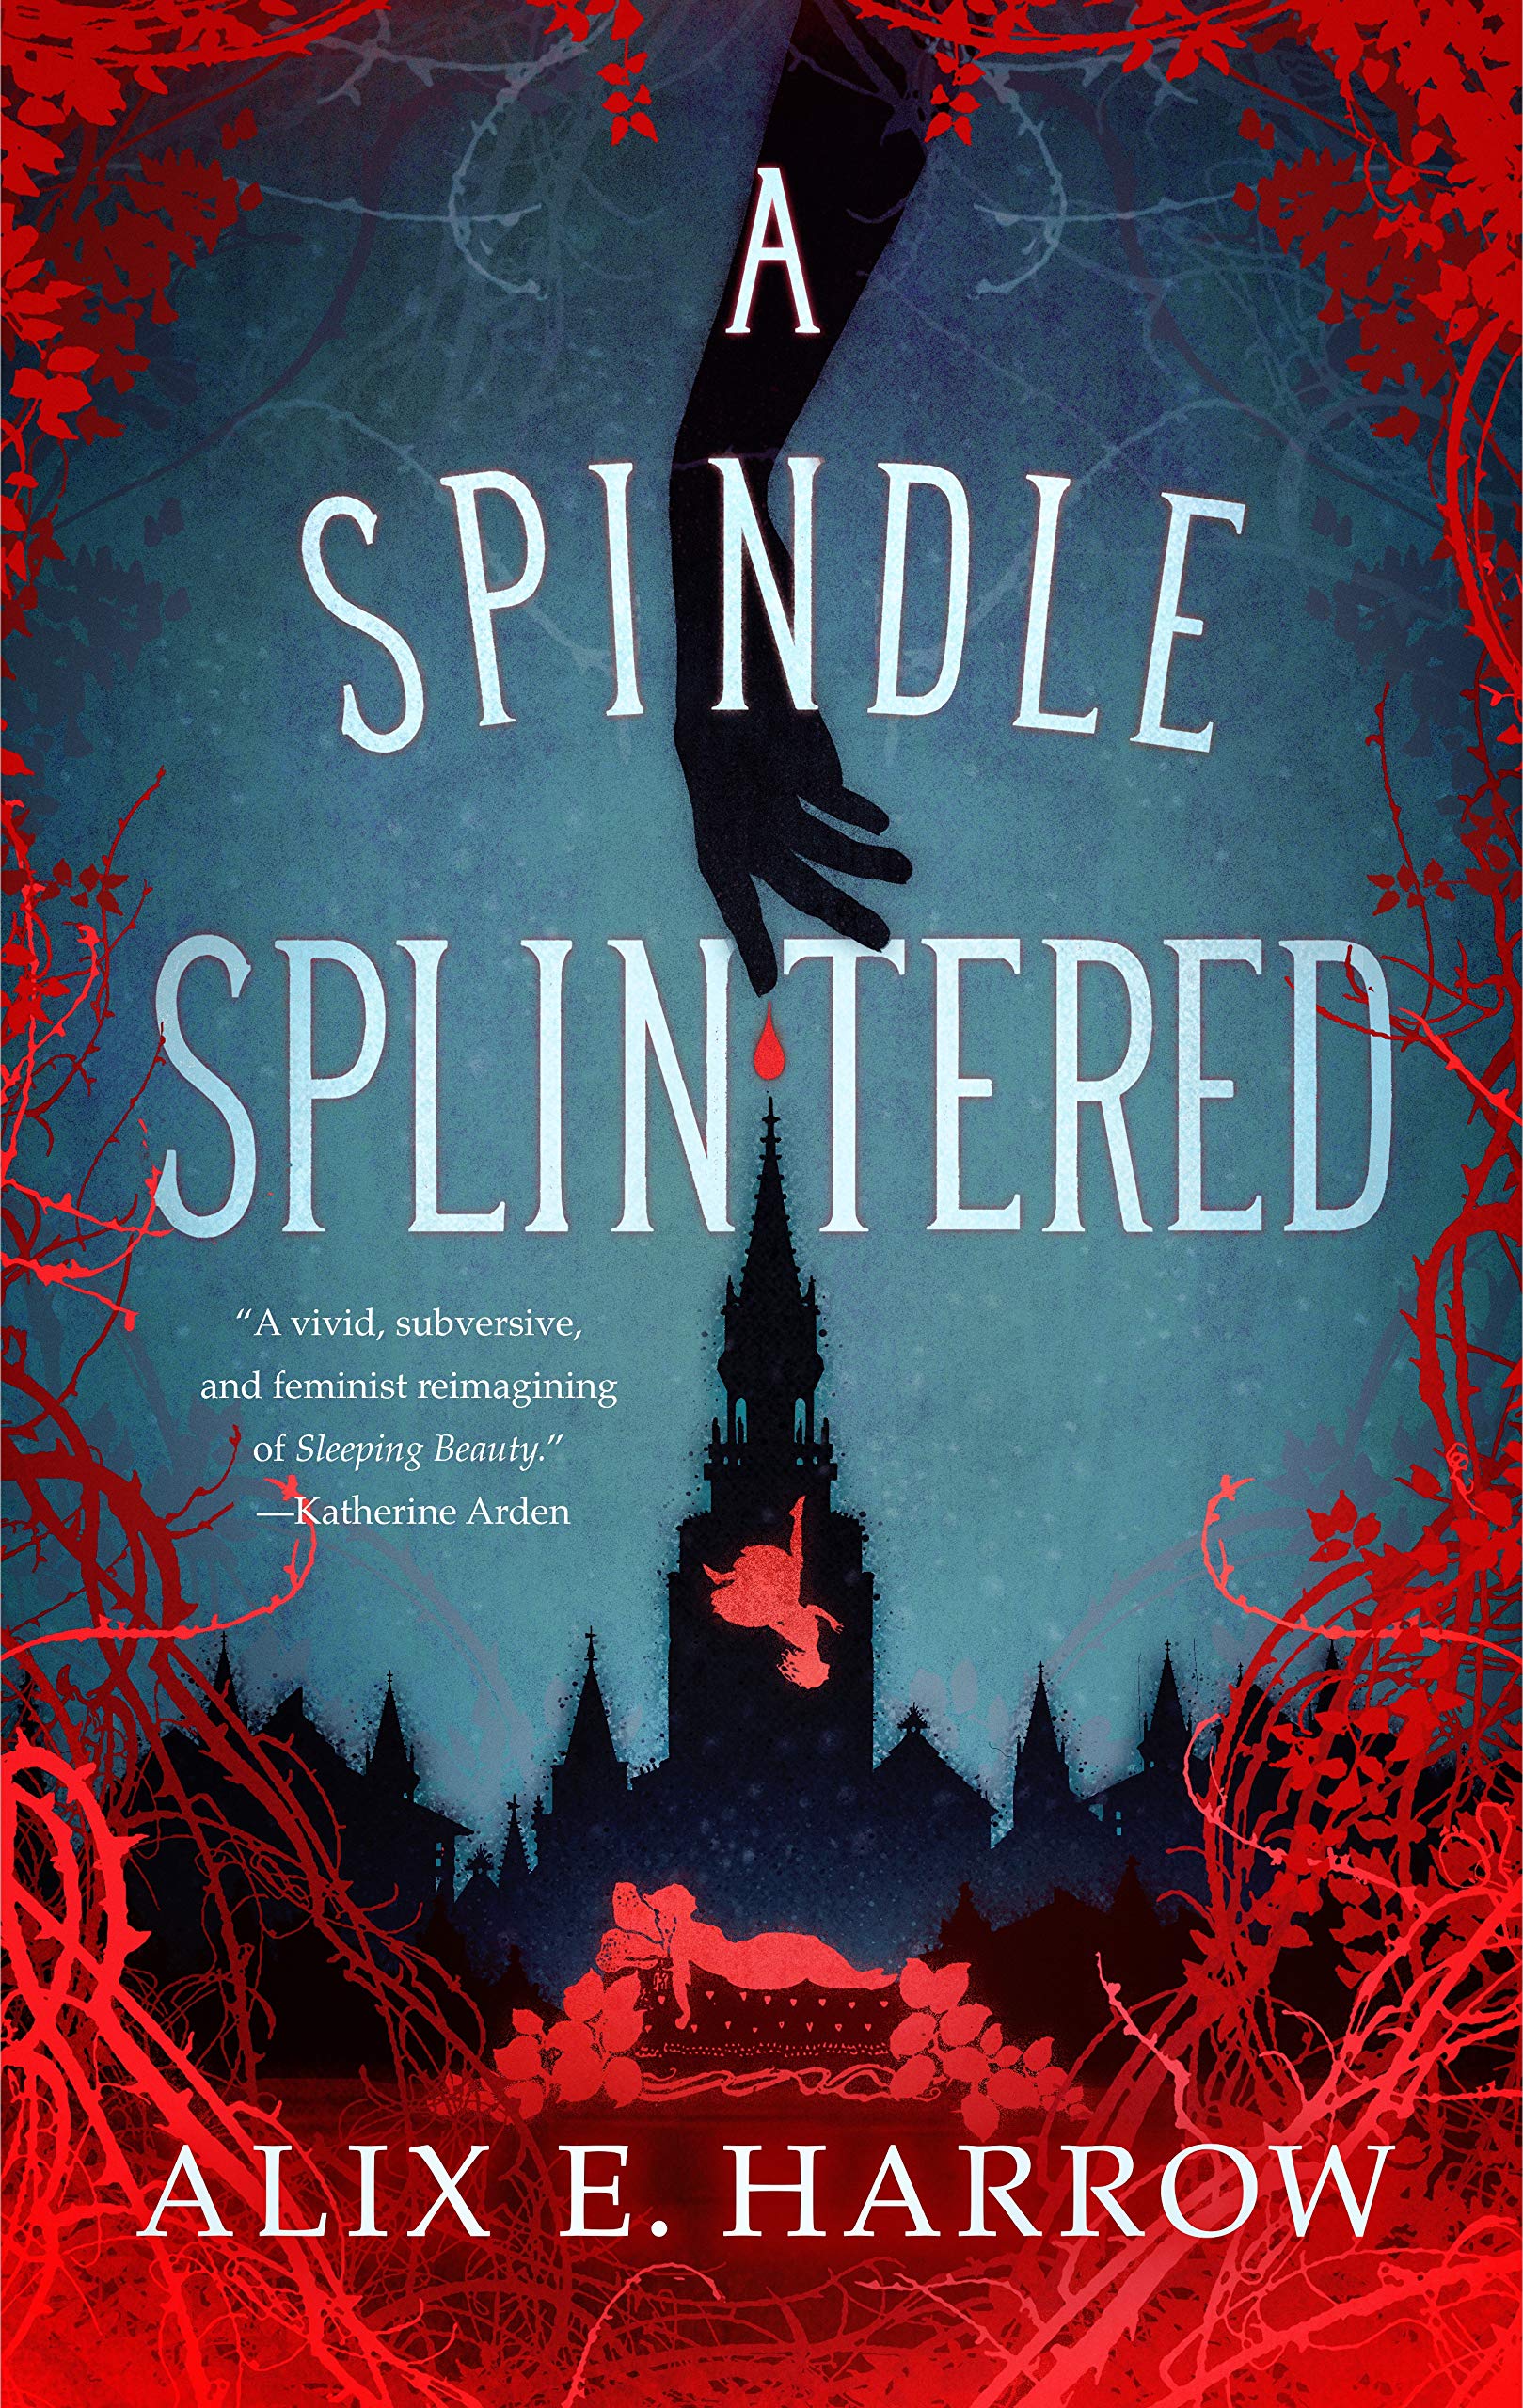 Live event with Alix E. Harrow/The Spindle Splintered